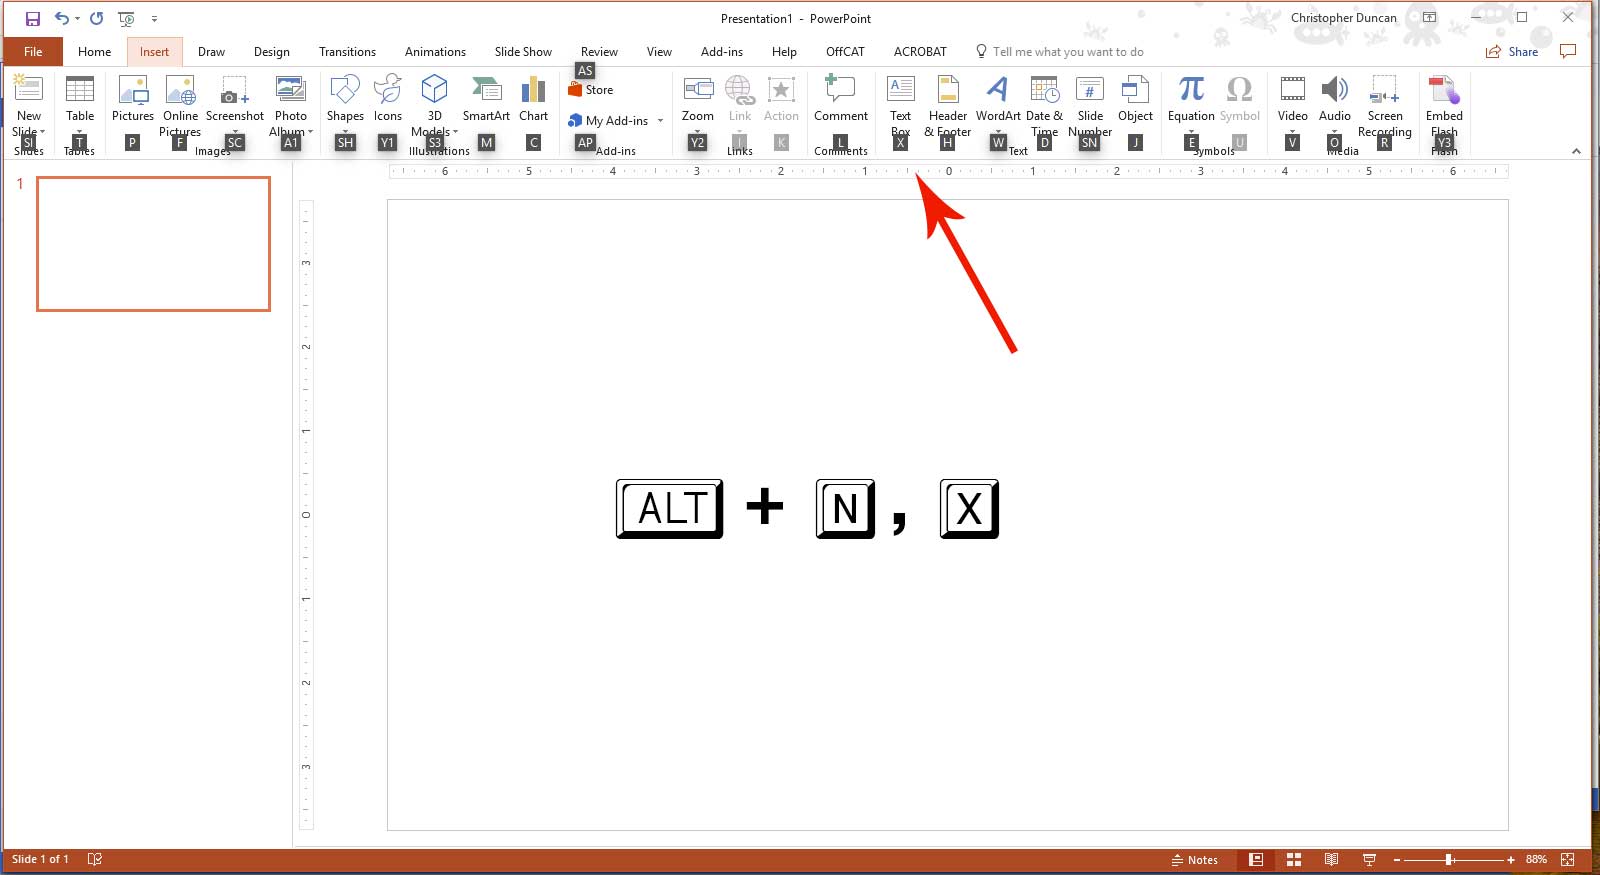 edit text boxes in excel 2008 for mac